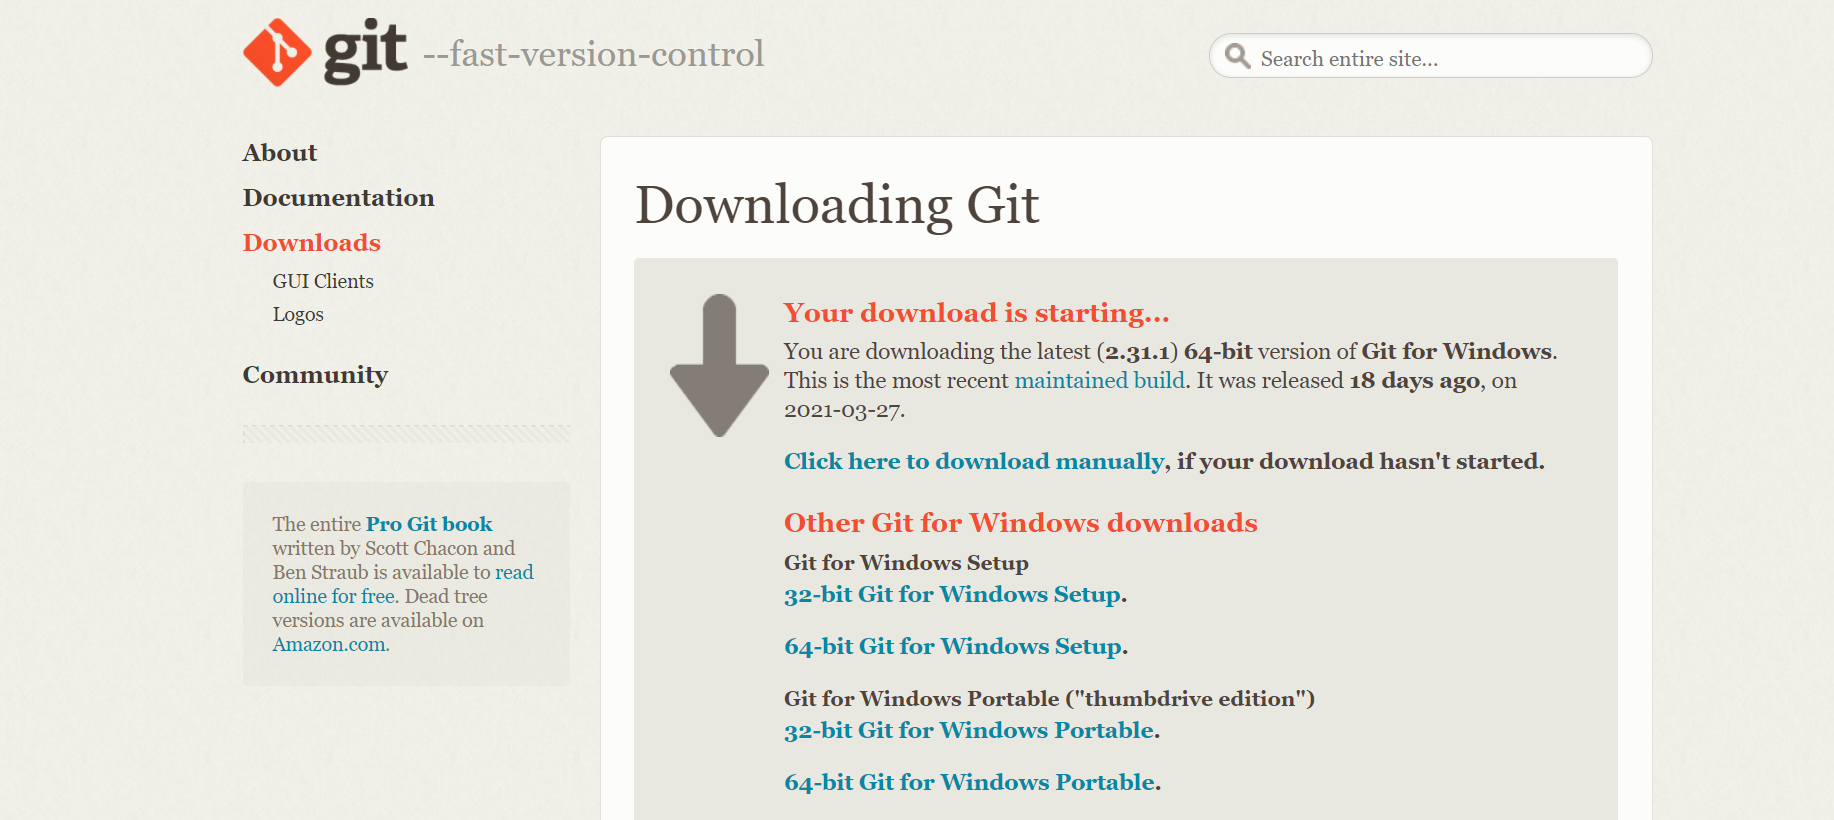 Git click to download manually